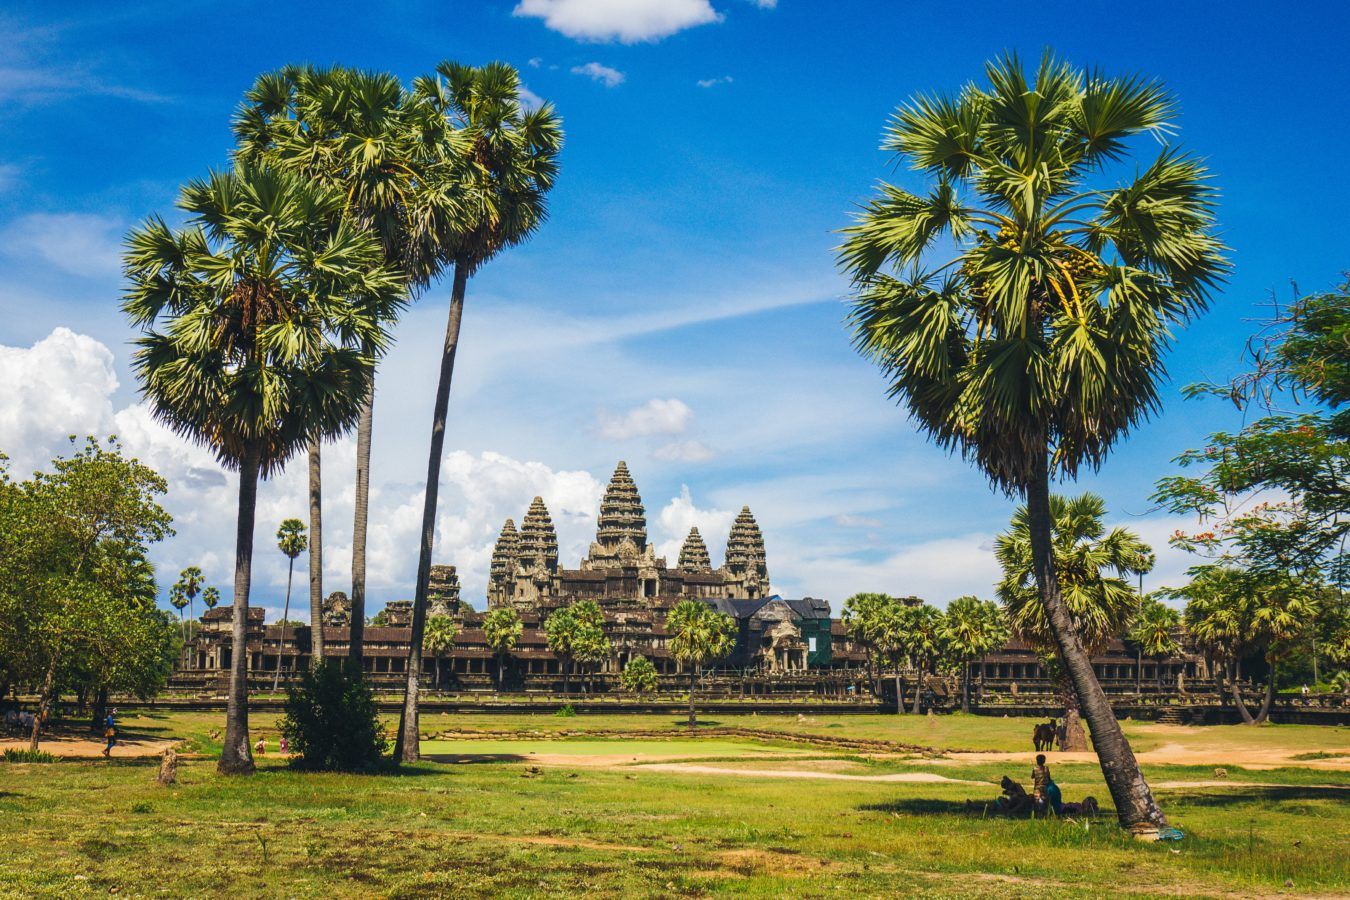 The travel requirements you must take notice of when you visit Cambodia